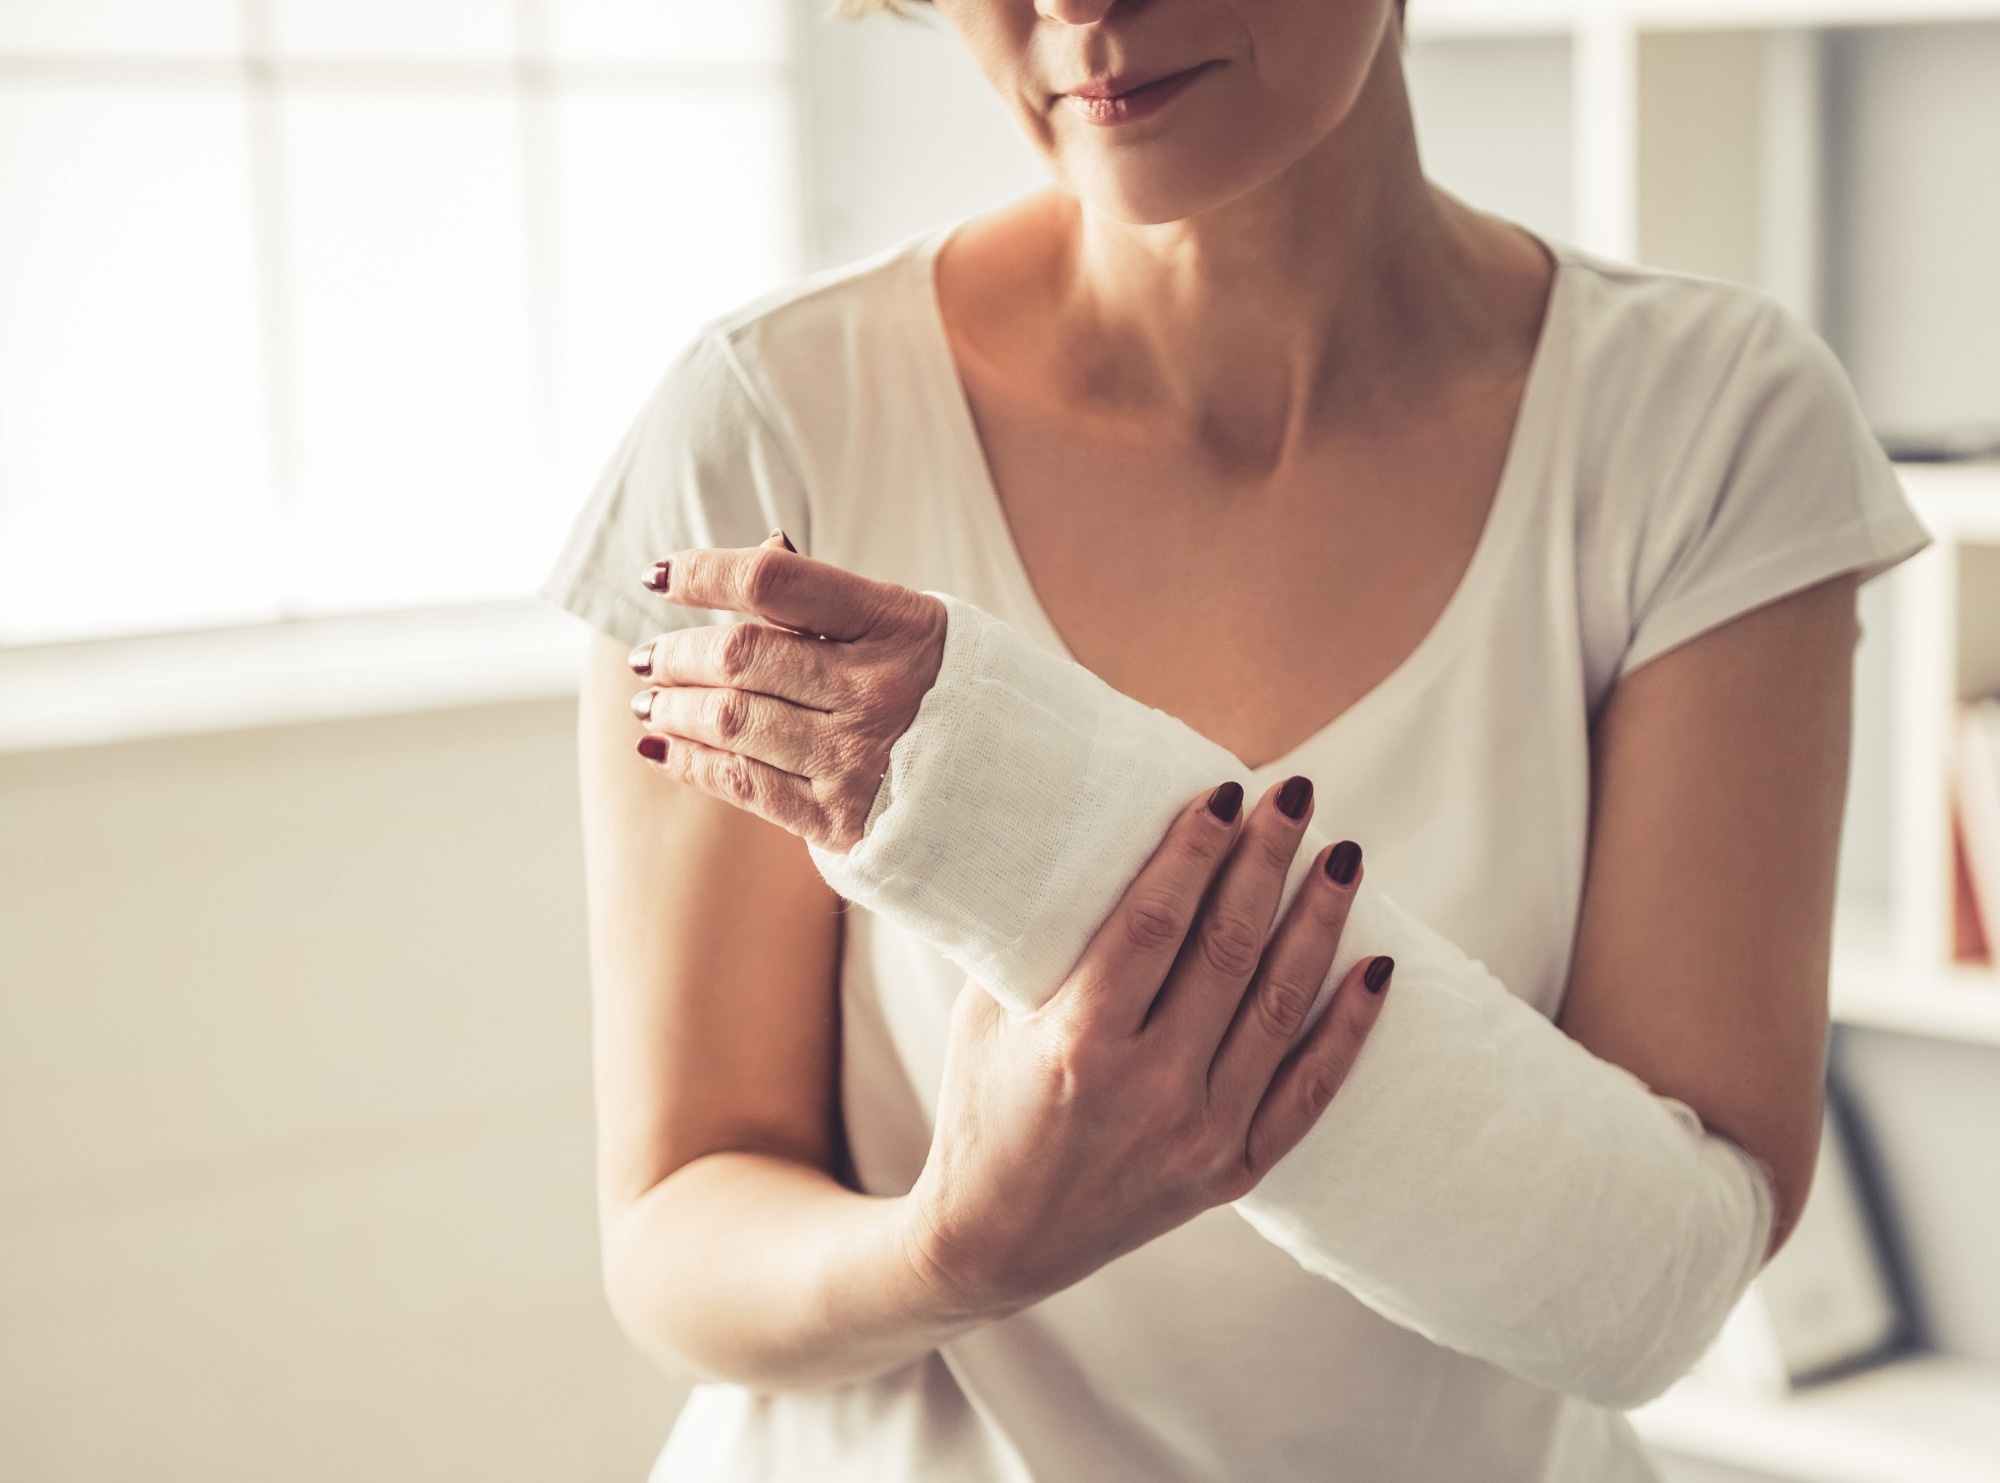 Study: Prediabetes and Fracture Risk Among Midlife Women in the Study of Women’s Health Across the Nation. Image Credit: VGstockstudio/Shutterstock.com